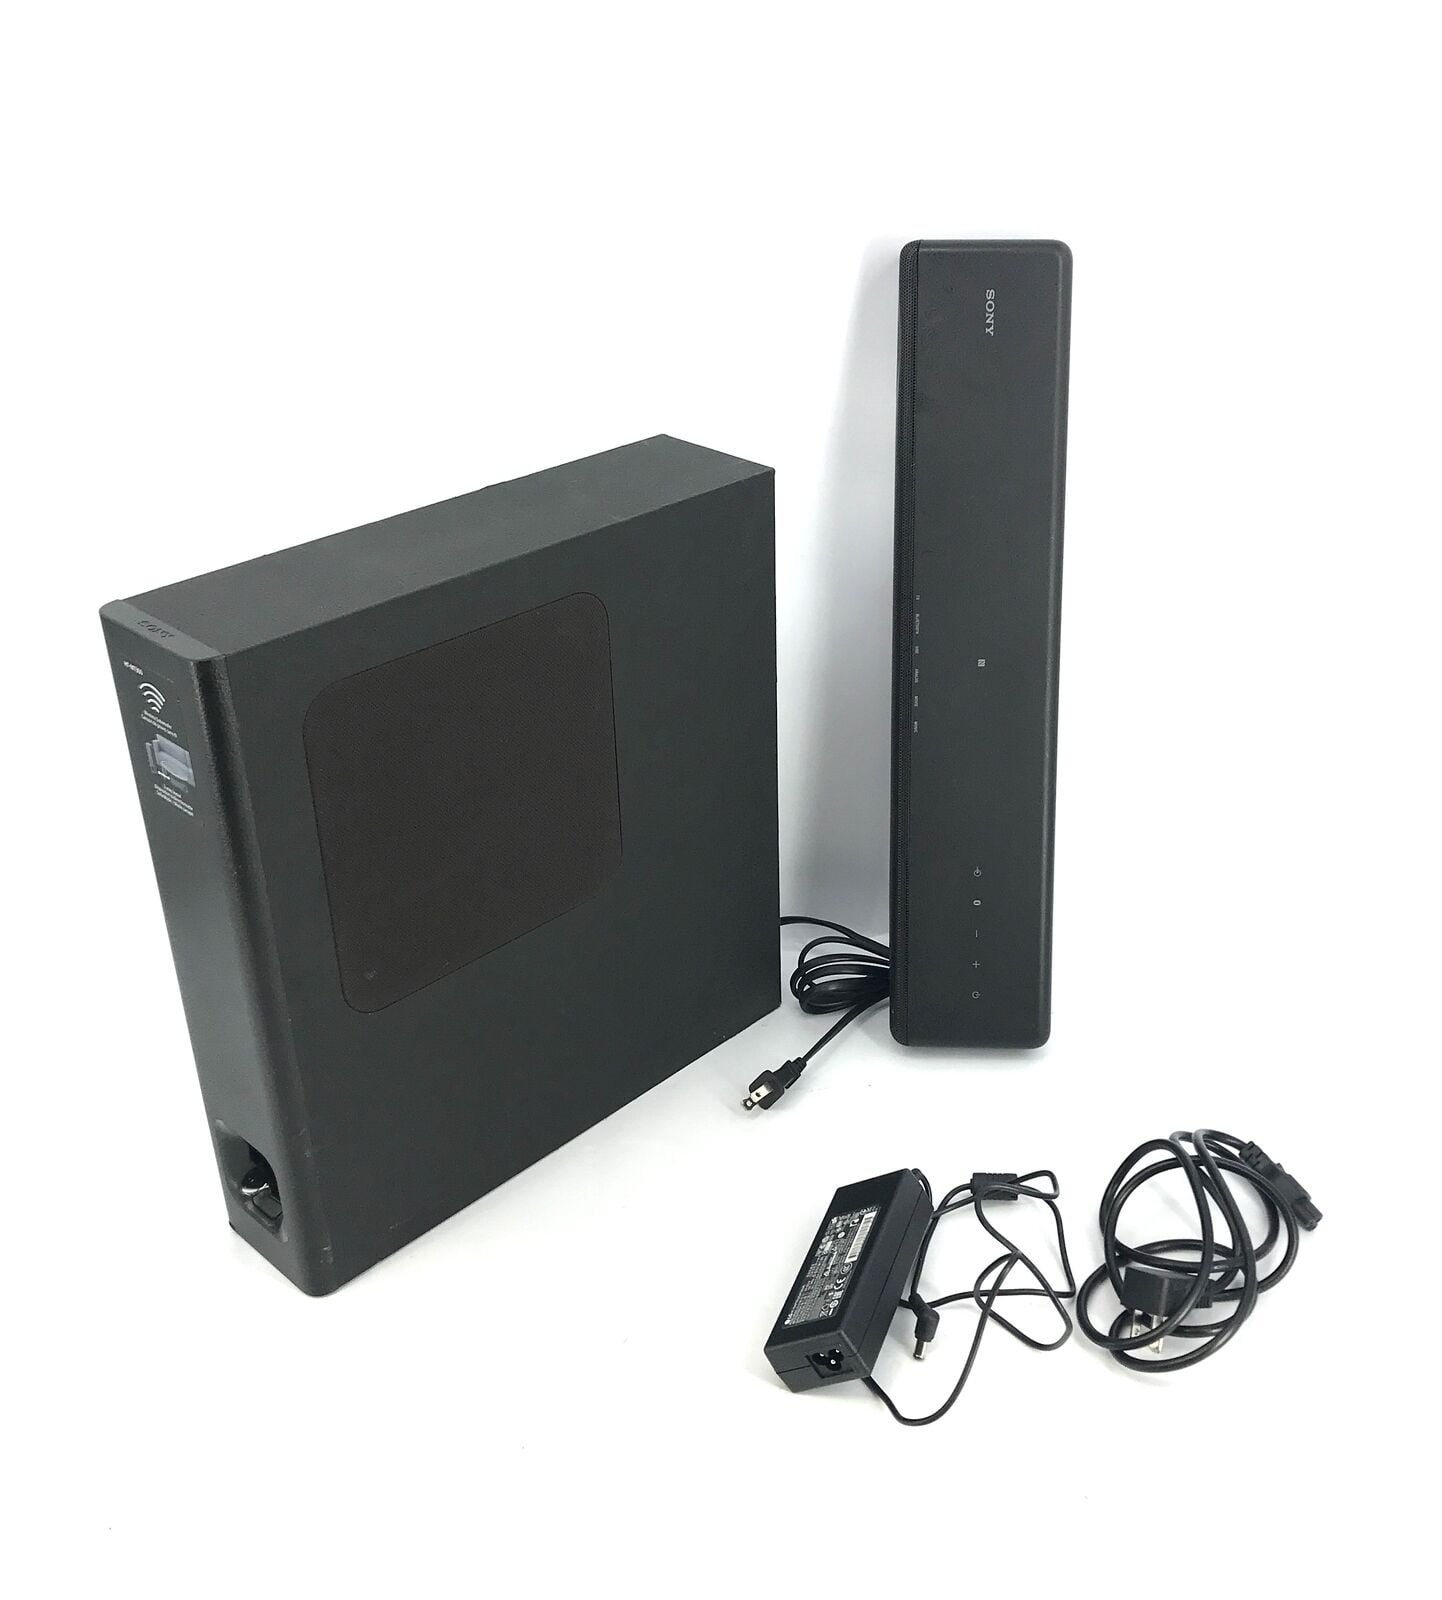 Sony HT-MT300 2.1-Channel Bluetooth w/ Subwoofer #VT7834 Used Walmart.com